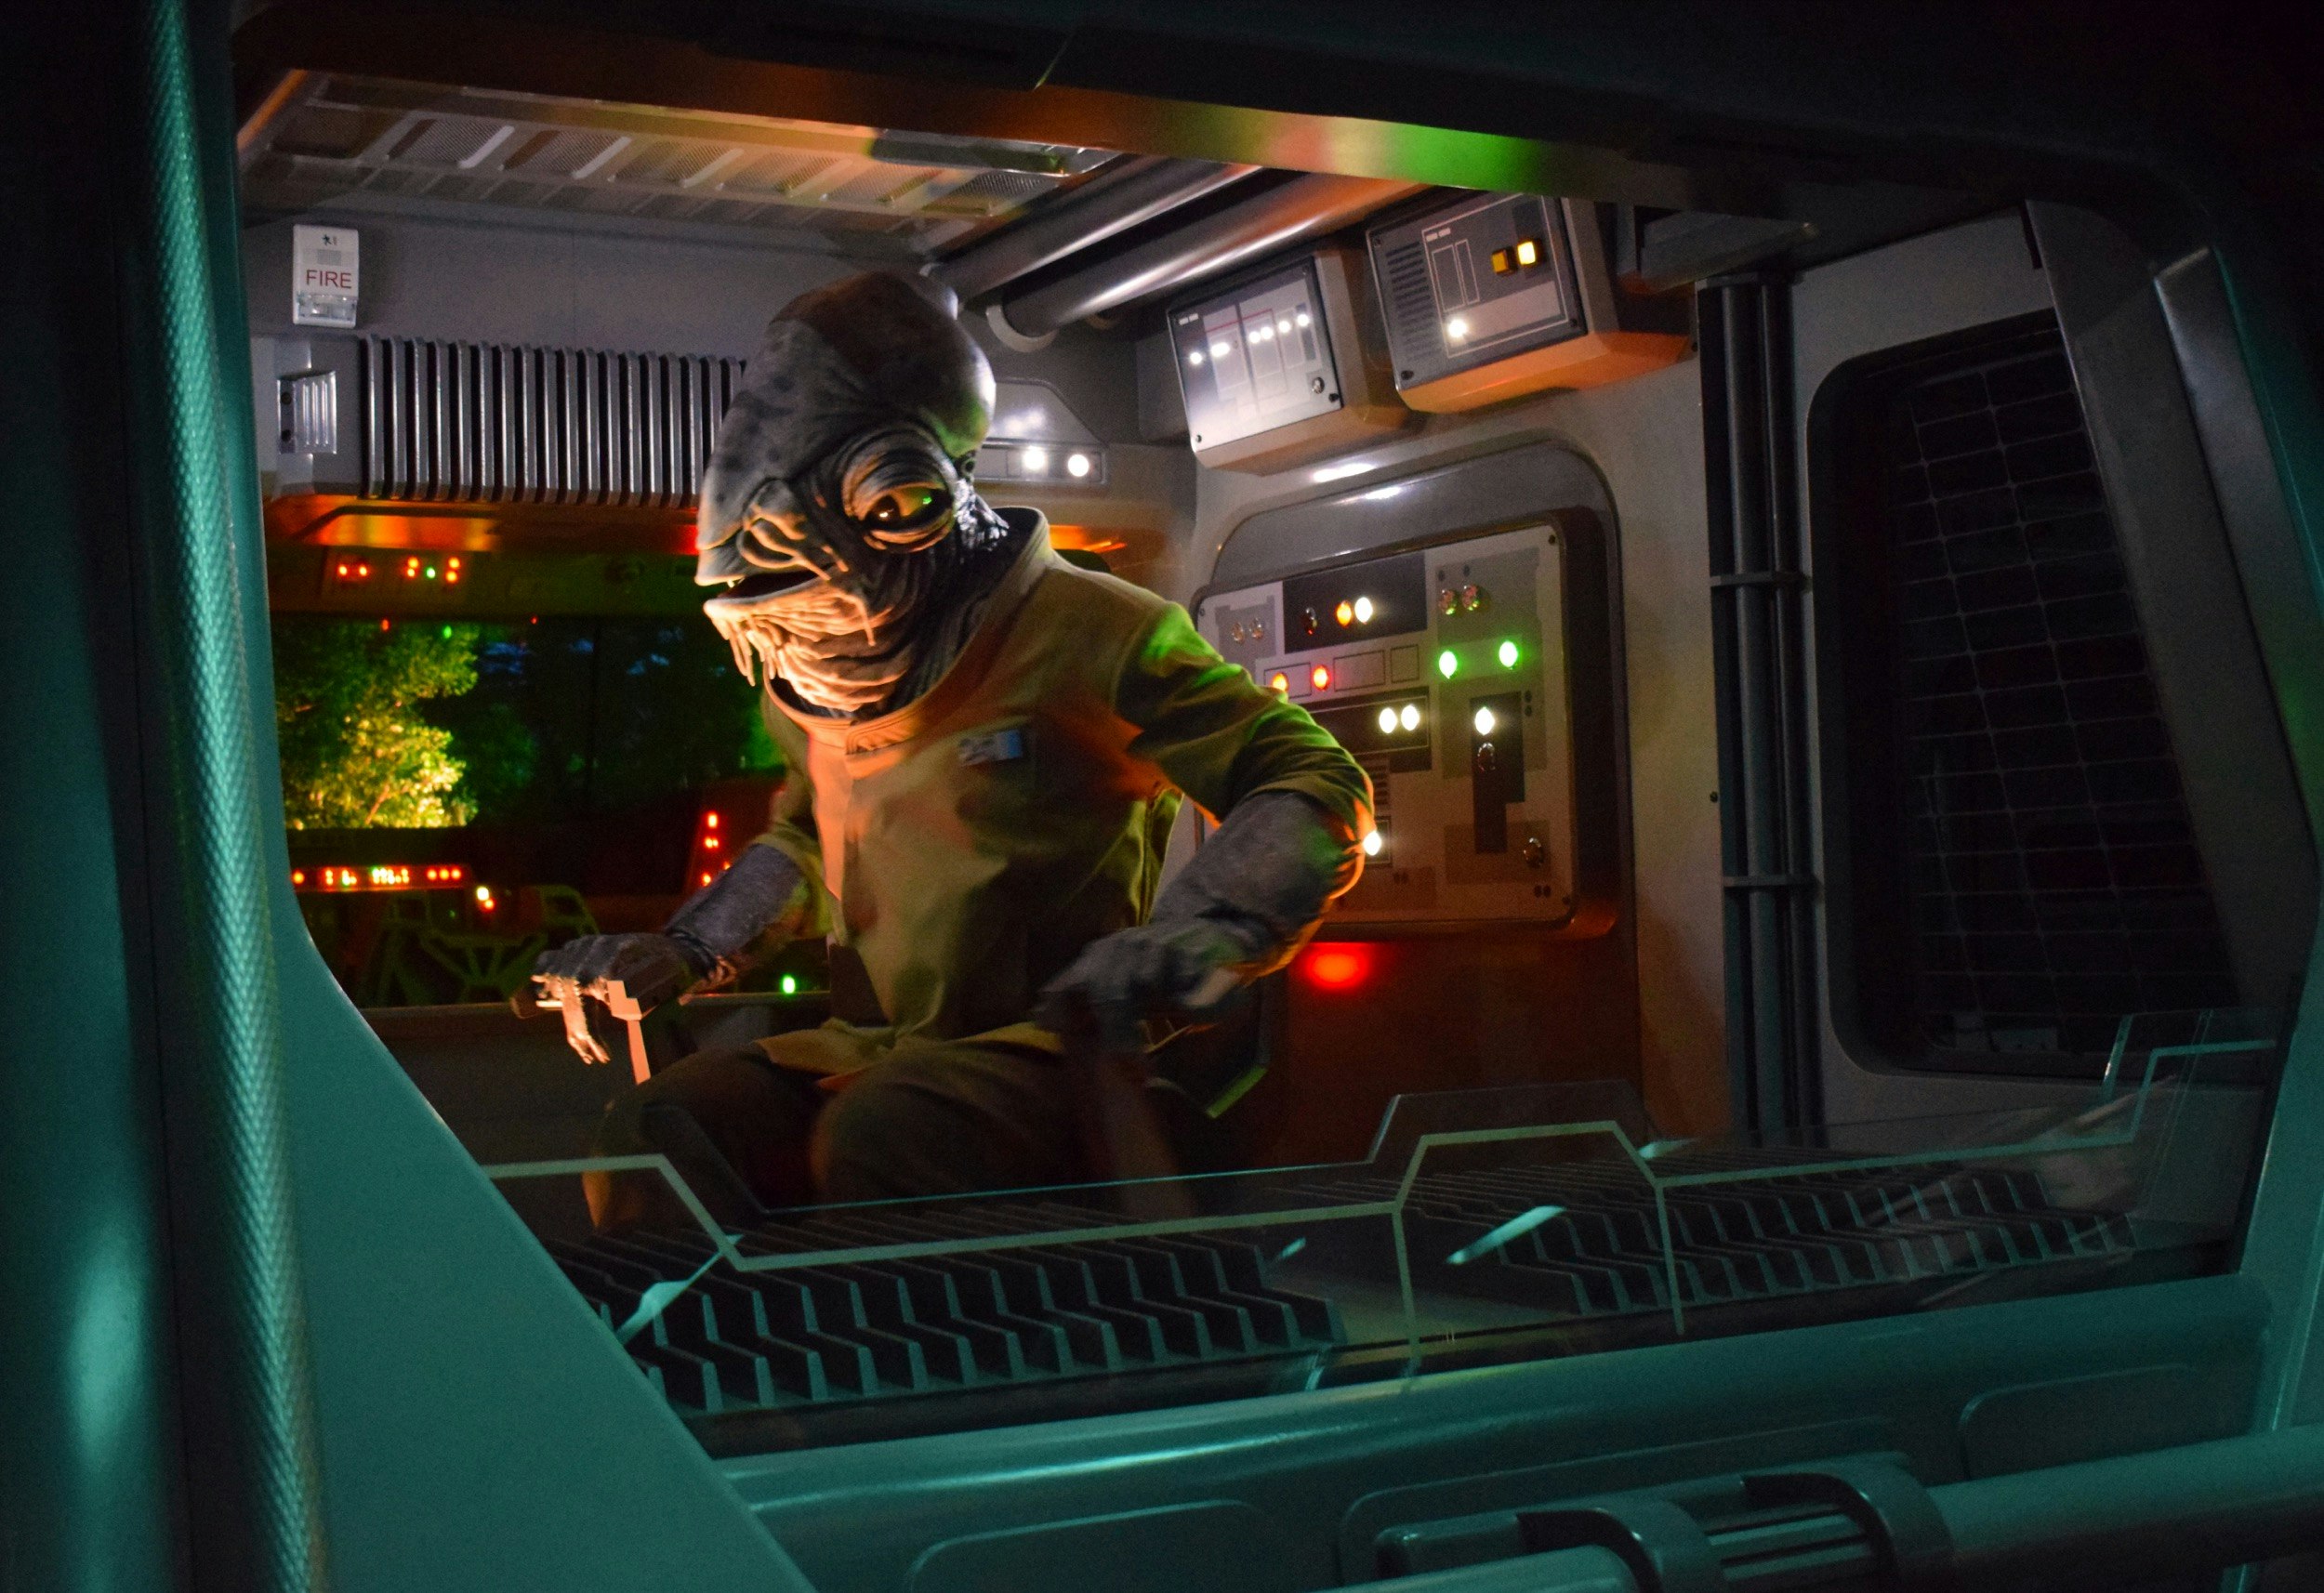 An animatronic alien is part of a theme park ride called Star Wars: Rise of the Resistance